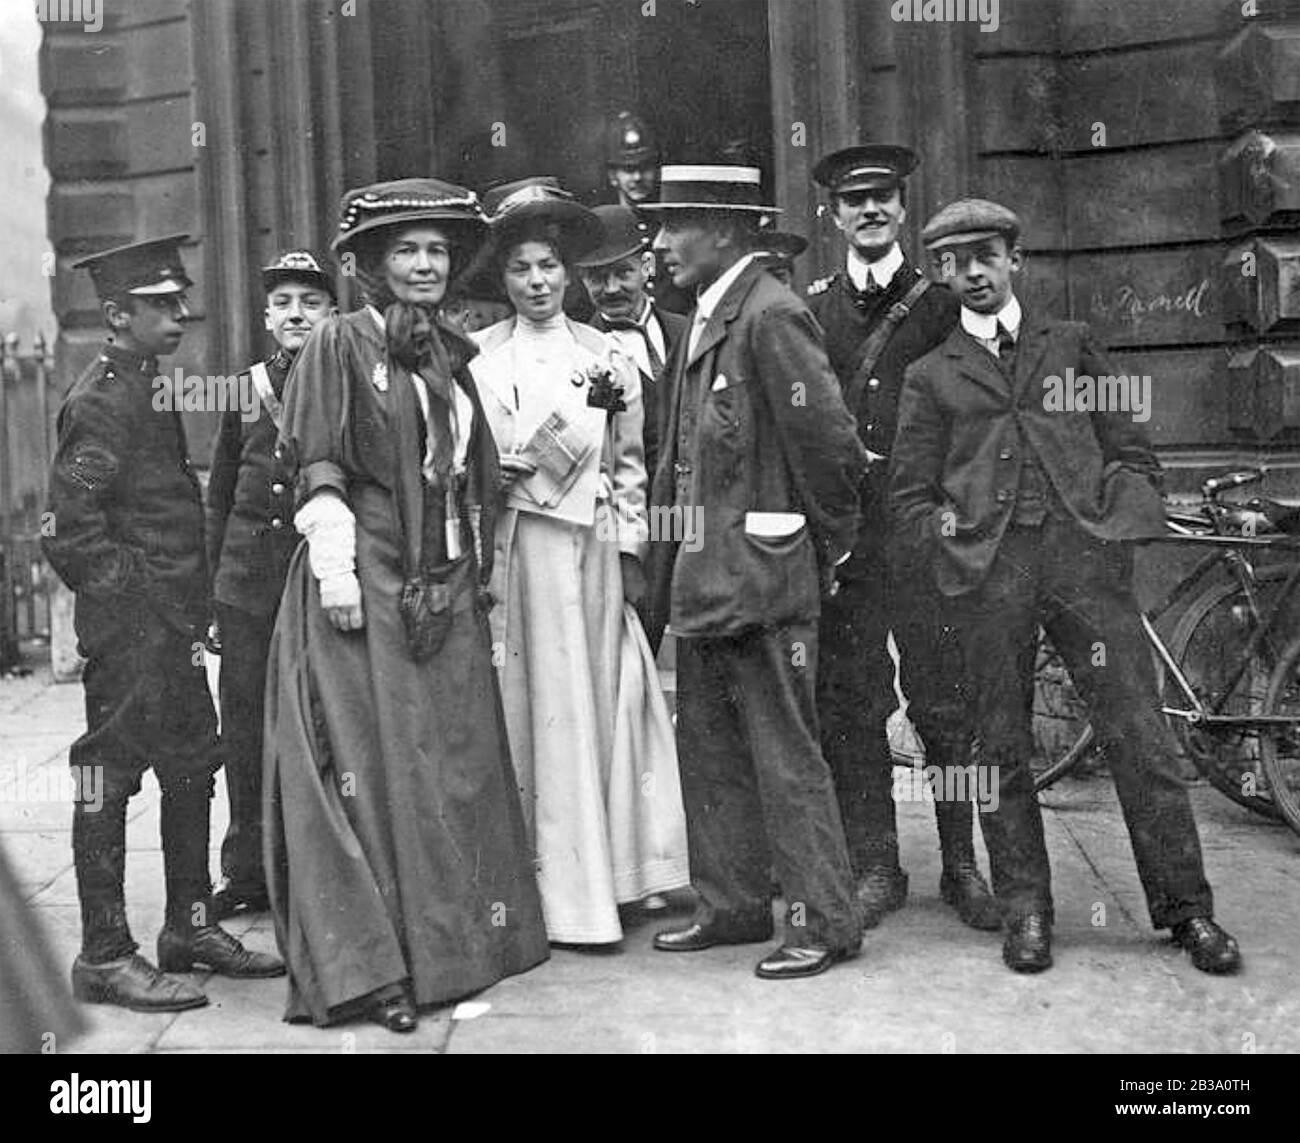 CHRISTABEL PANKHURST (1880-1958) in white with the Emmeline Pethick-Lawrence and her husband outside Bow Street Magistrates Court during the Rush Trial, 14 October 1908. She was convicted the following year. Stock Photo